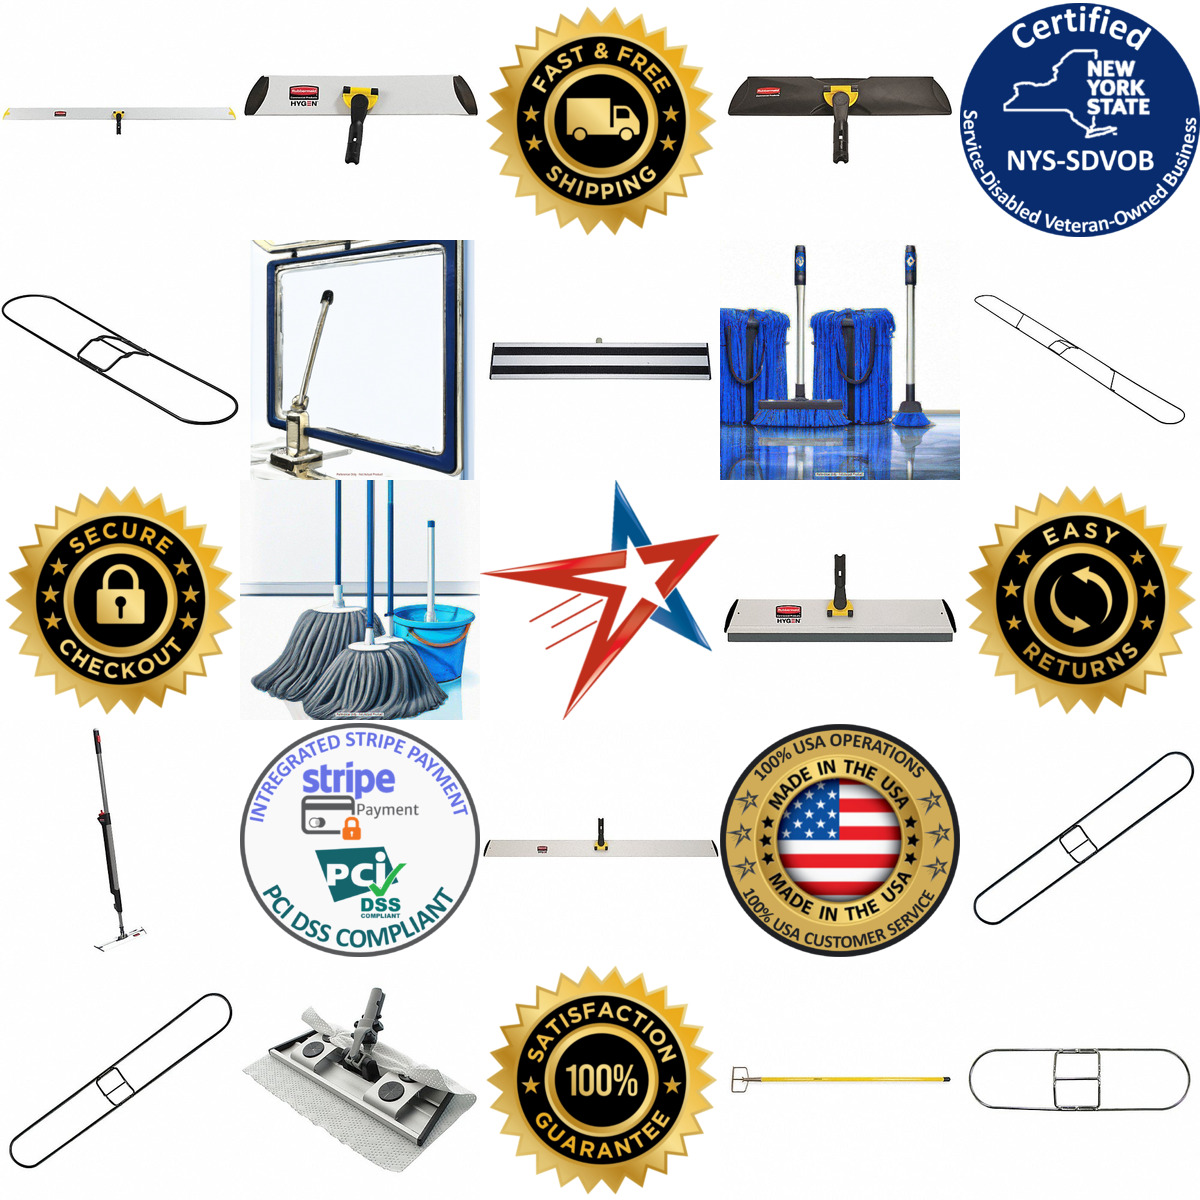 A selection of Mop Frames products on GoVets